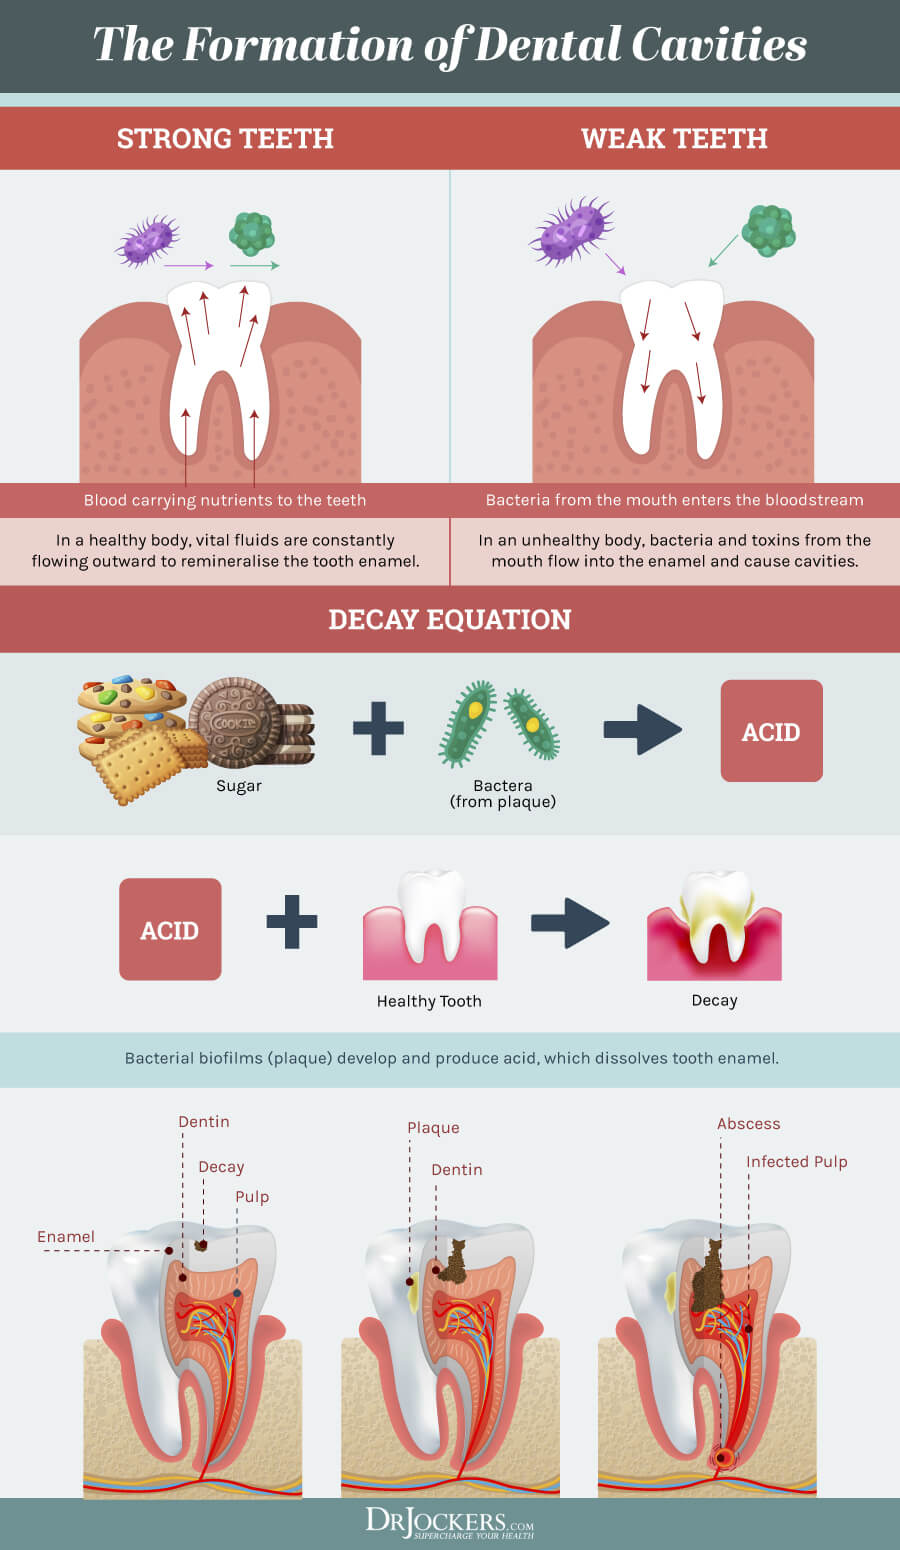 Healthy Teeth, The Top 9 Nutrients for Healthy Teeth and Gums